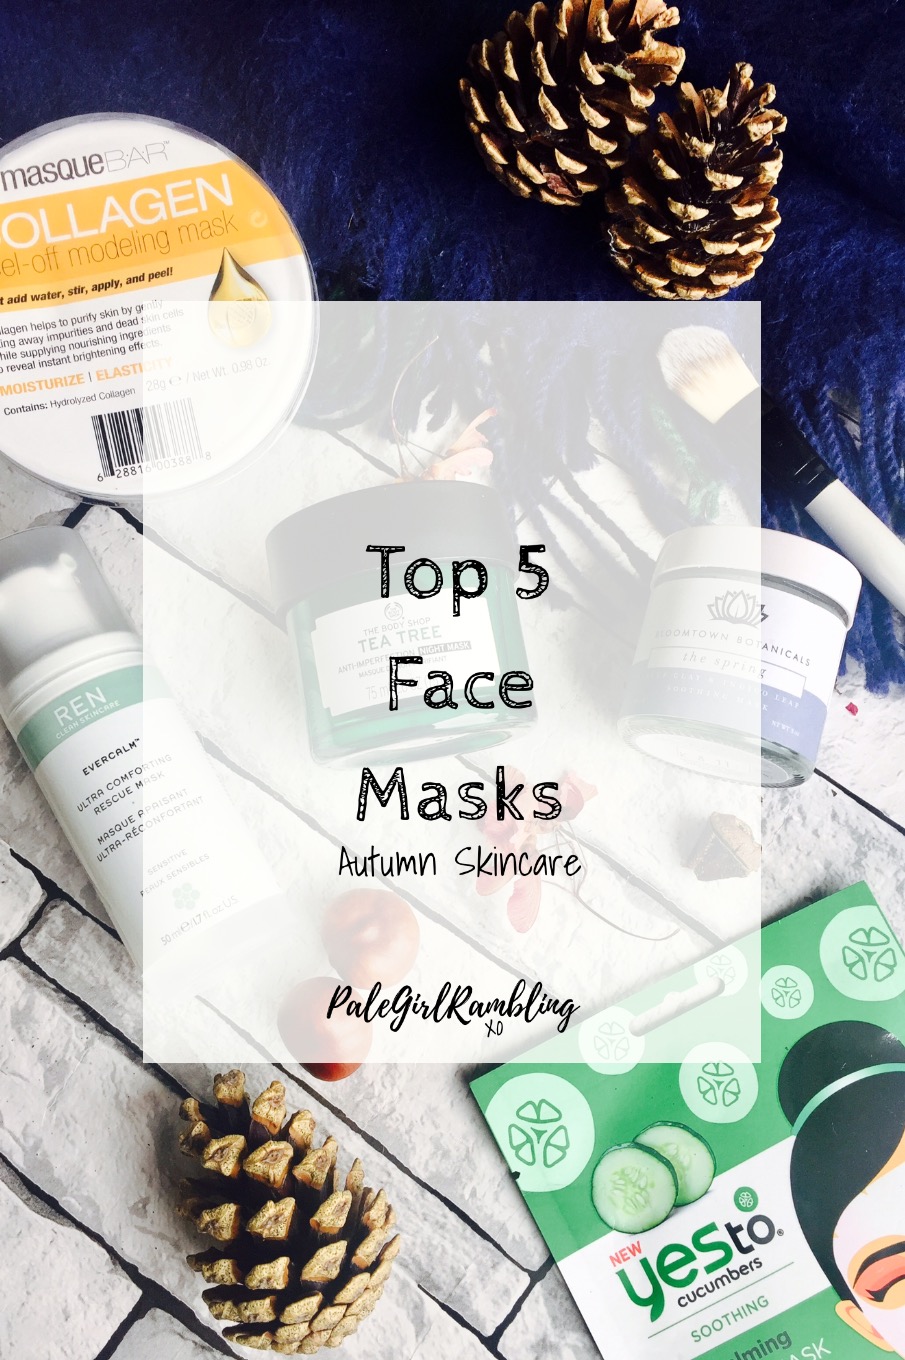 Top face masks Autumn Skincare the Body Shop REN yes to masque bar Bloomtown Botanicals